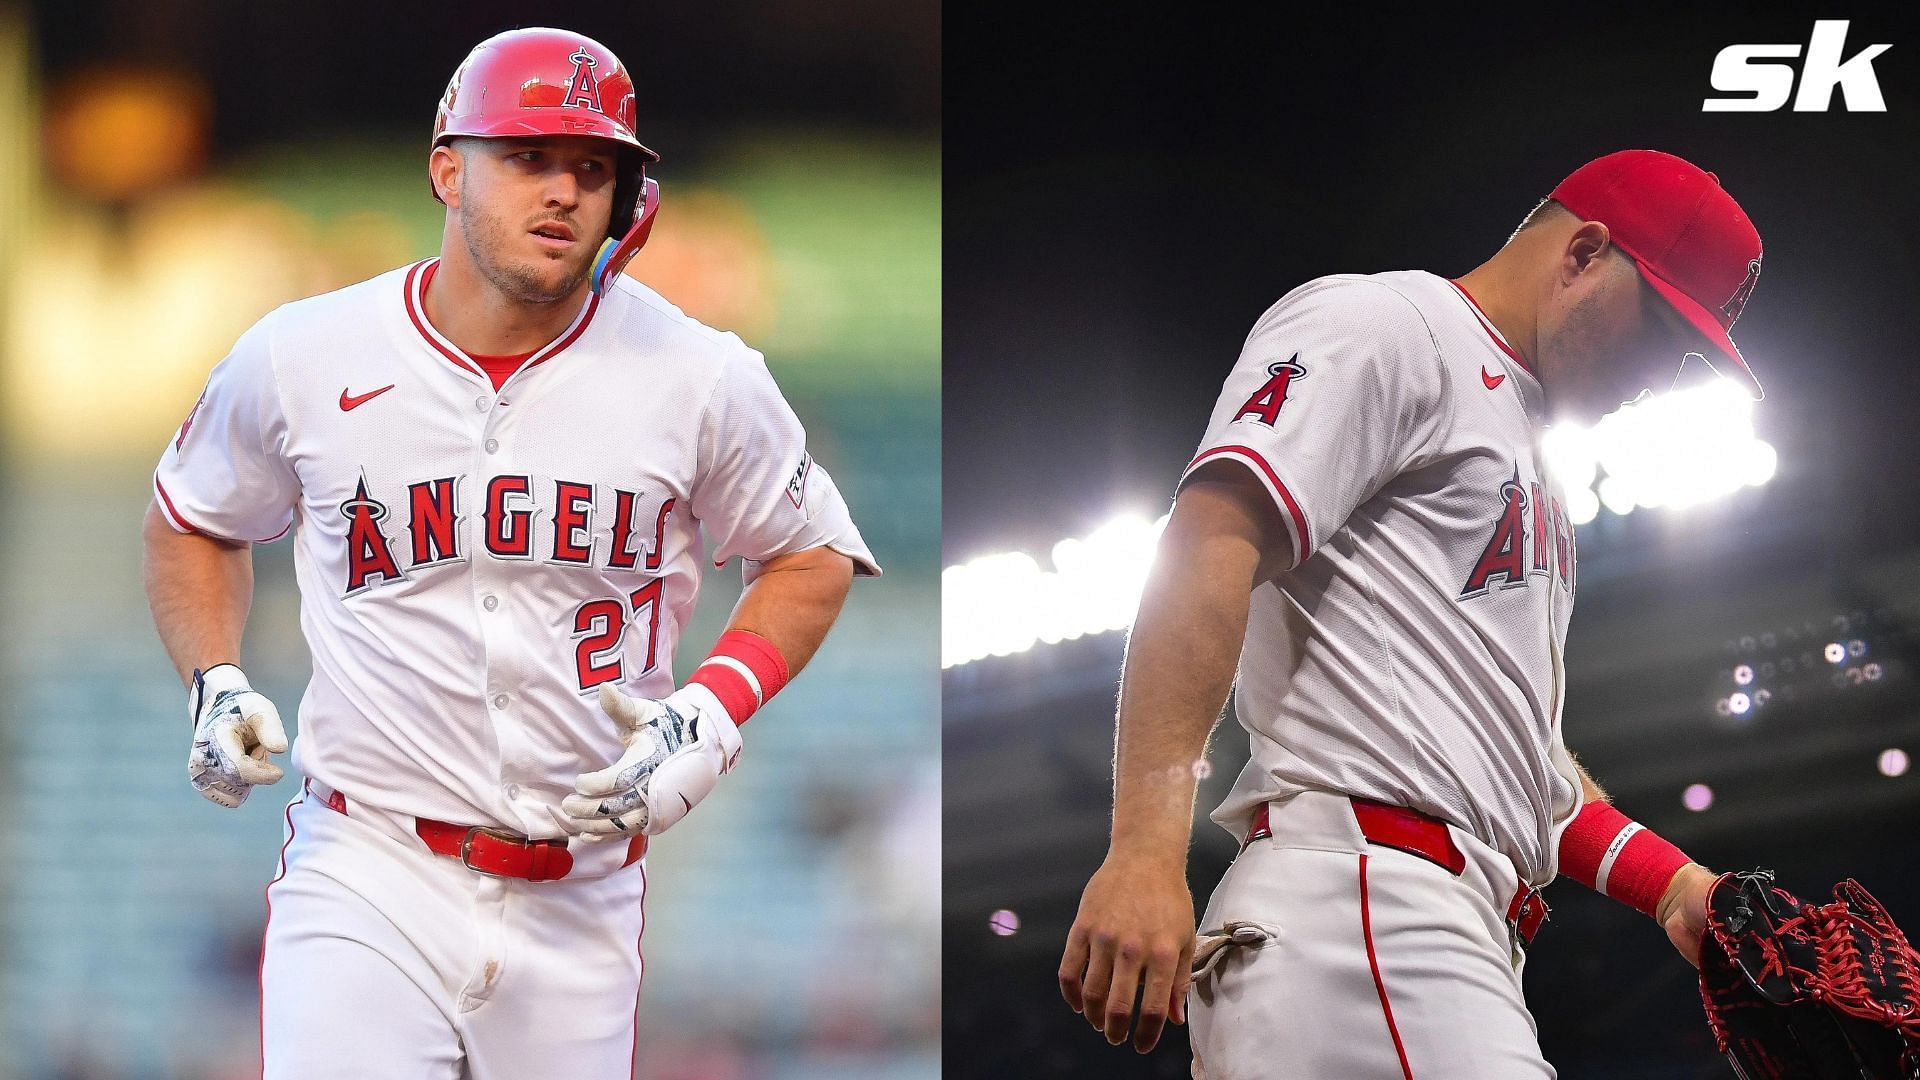 Mike Trout is slated to undergo knee surgery after suffering a torn meniscus